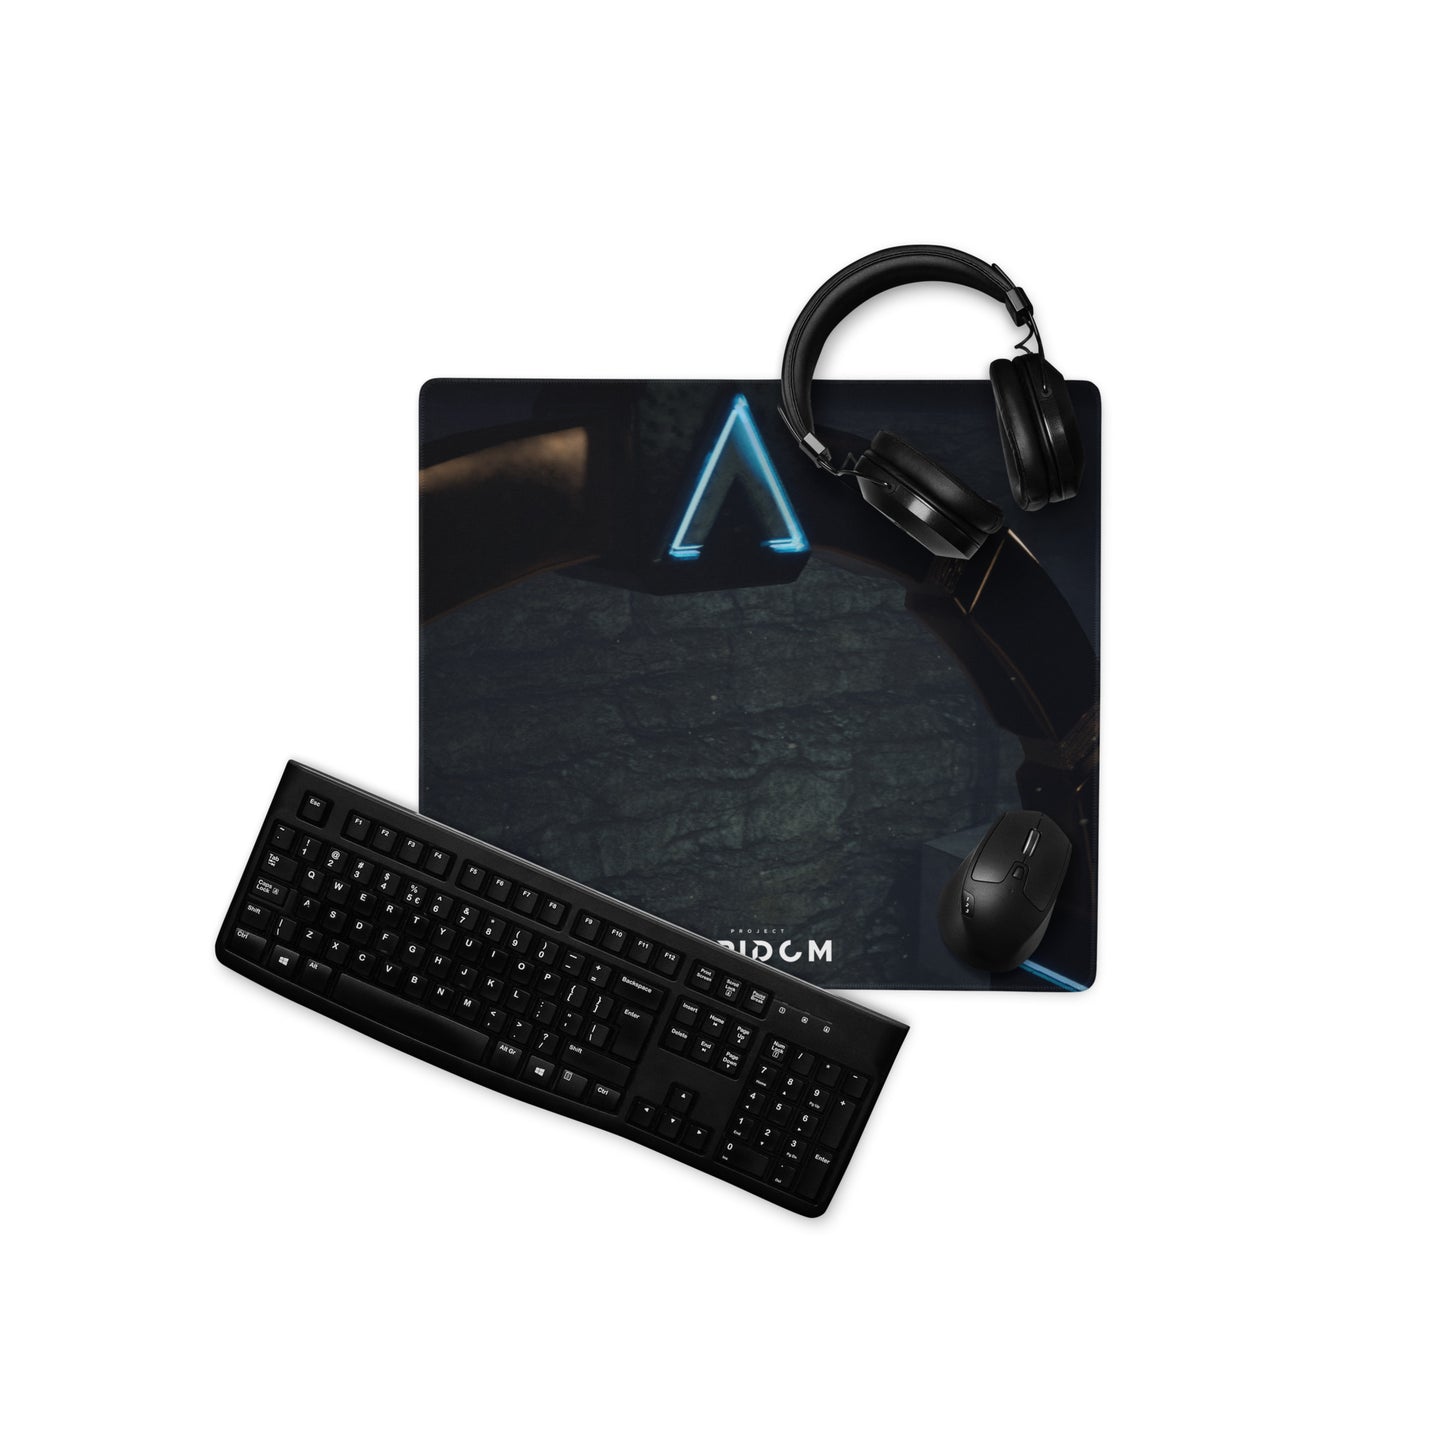 Project_Apidom_Gaming mouse pad